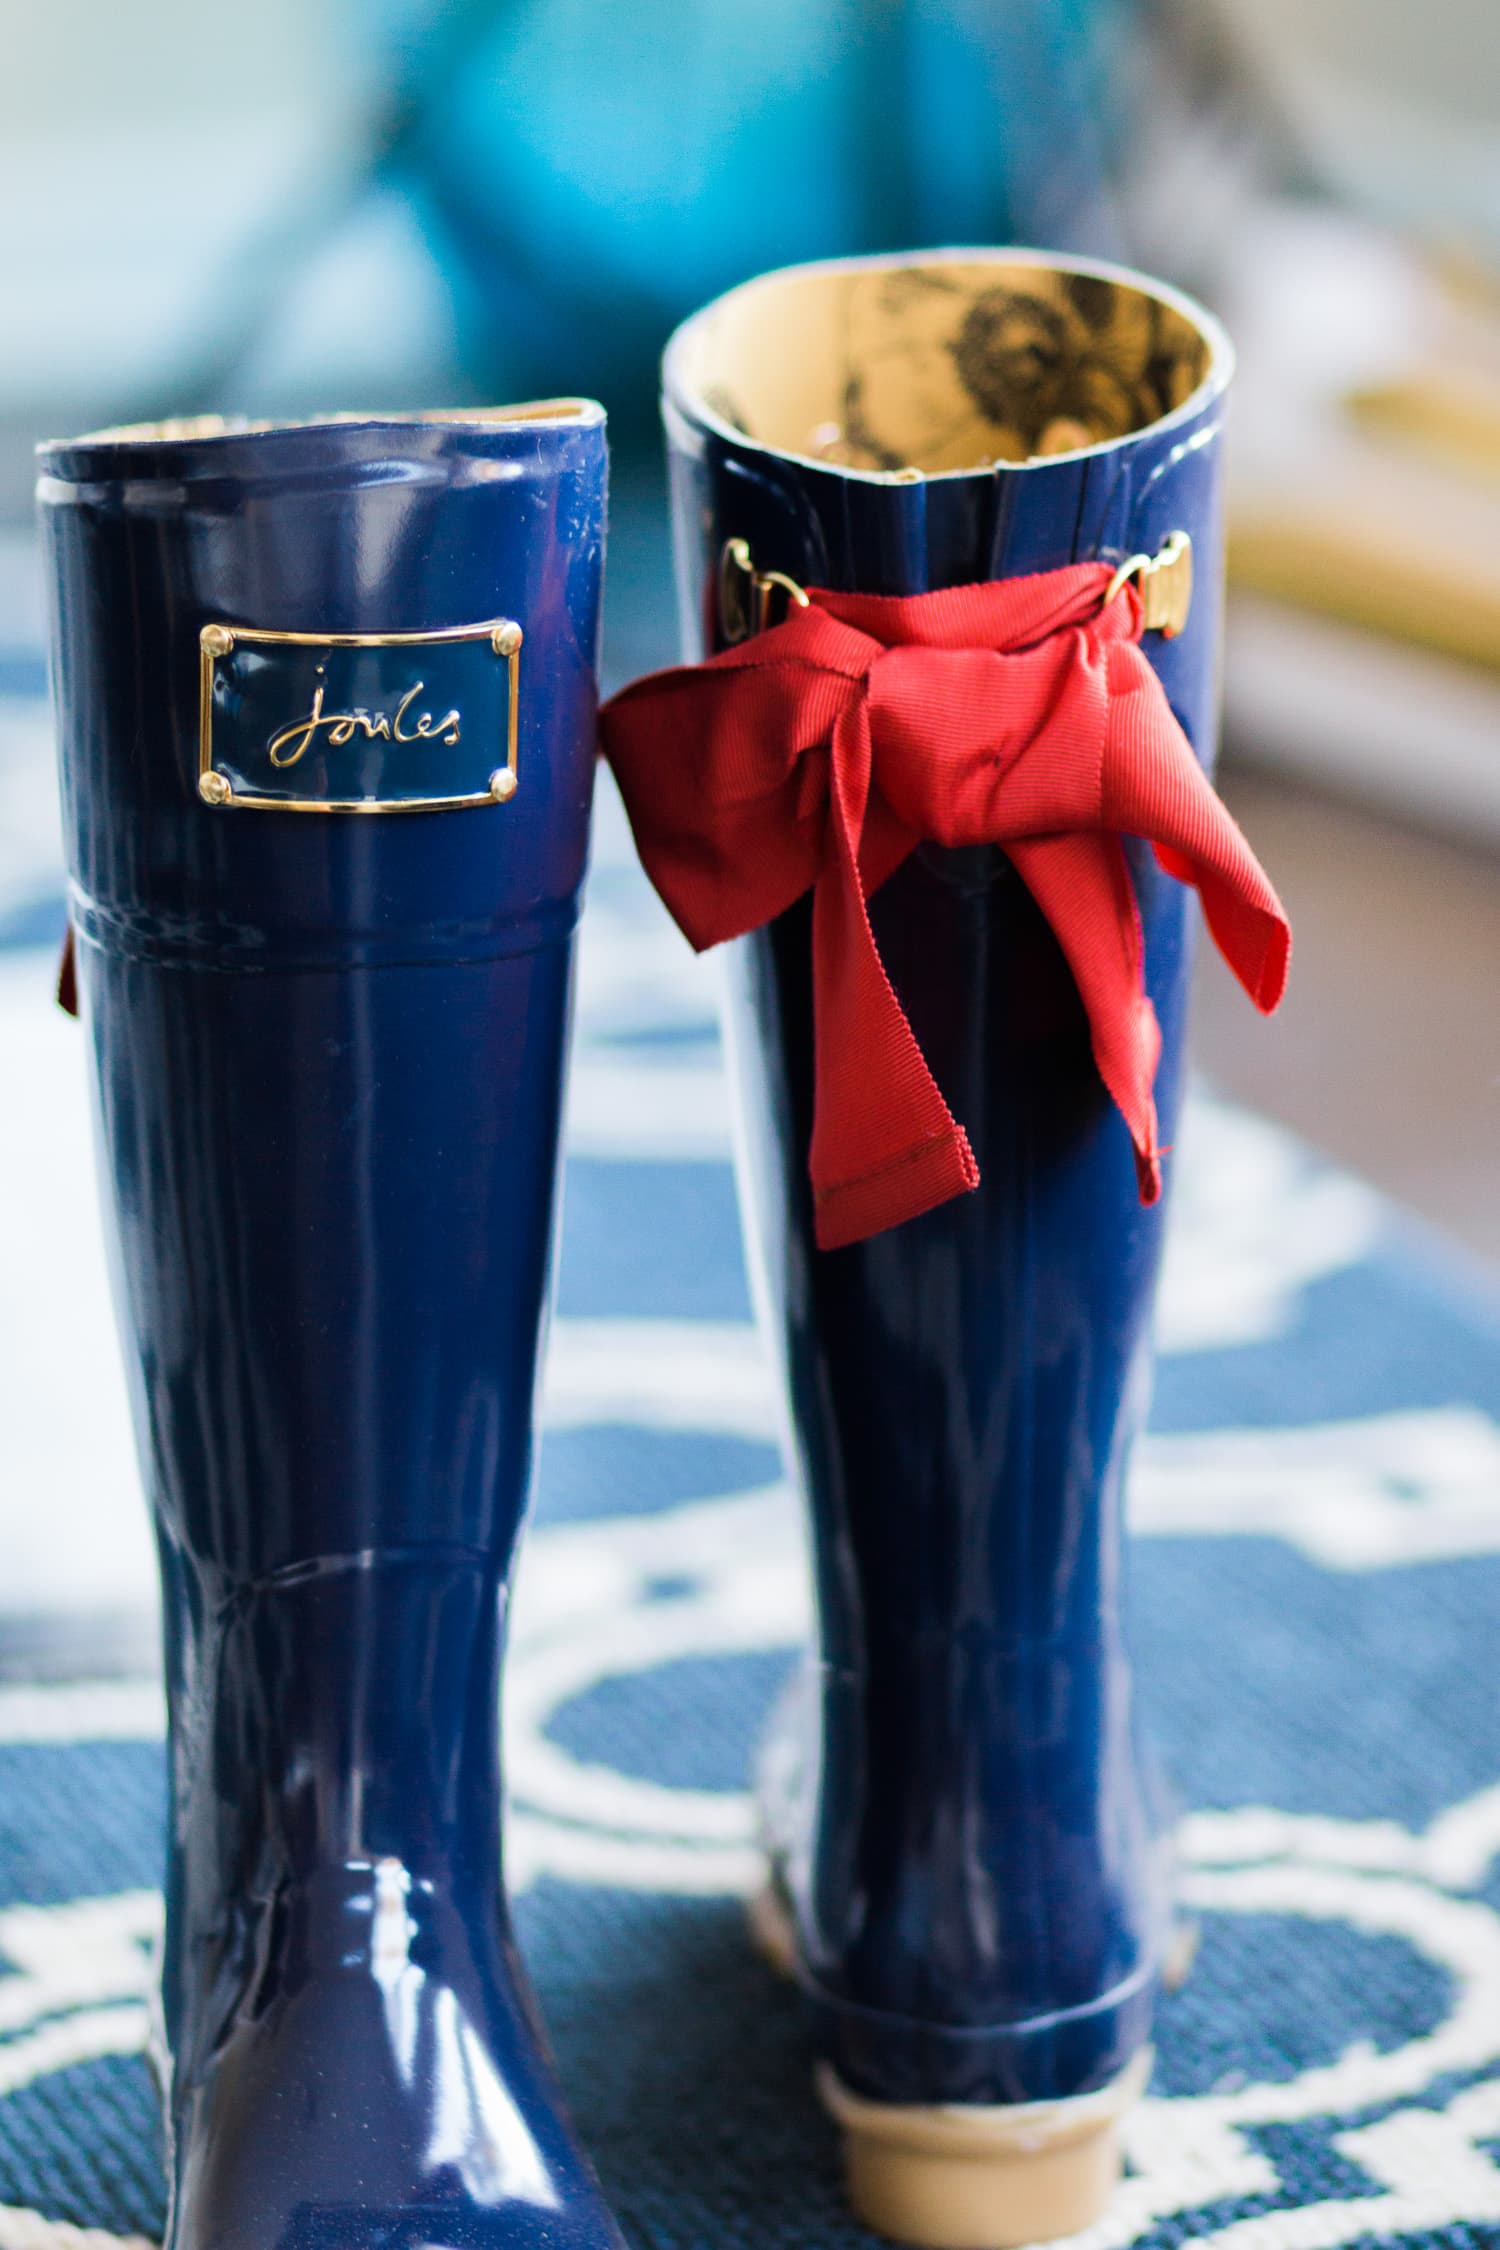 joules-evedon-rain-boots-navy-red-bow-6619